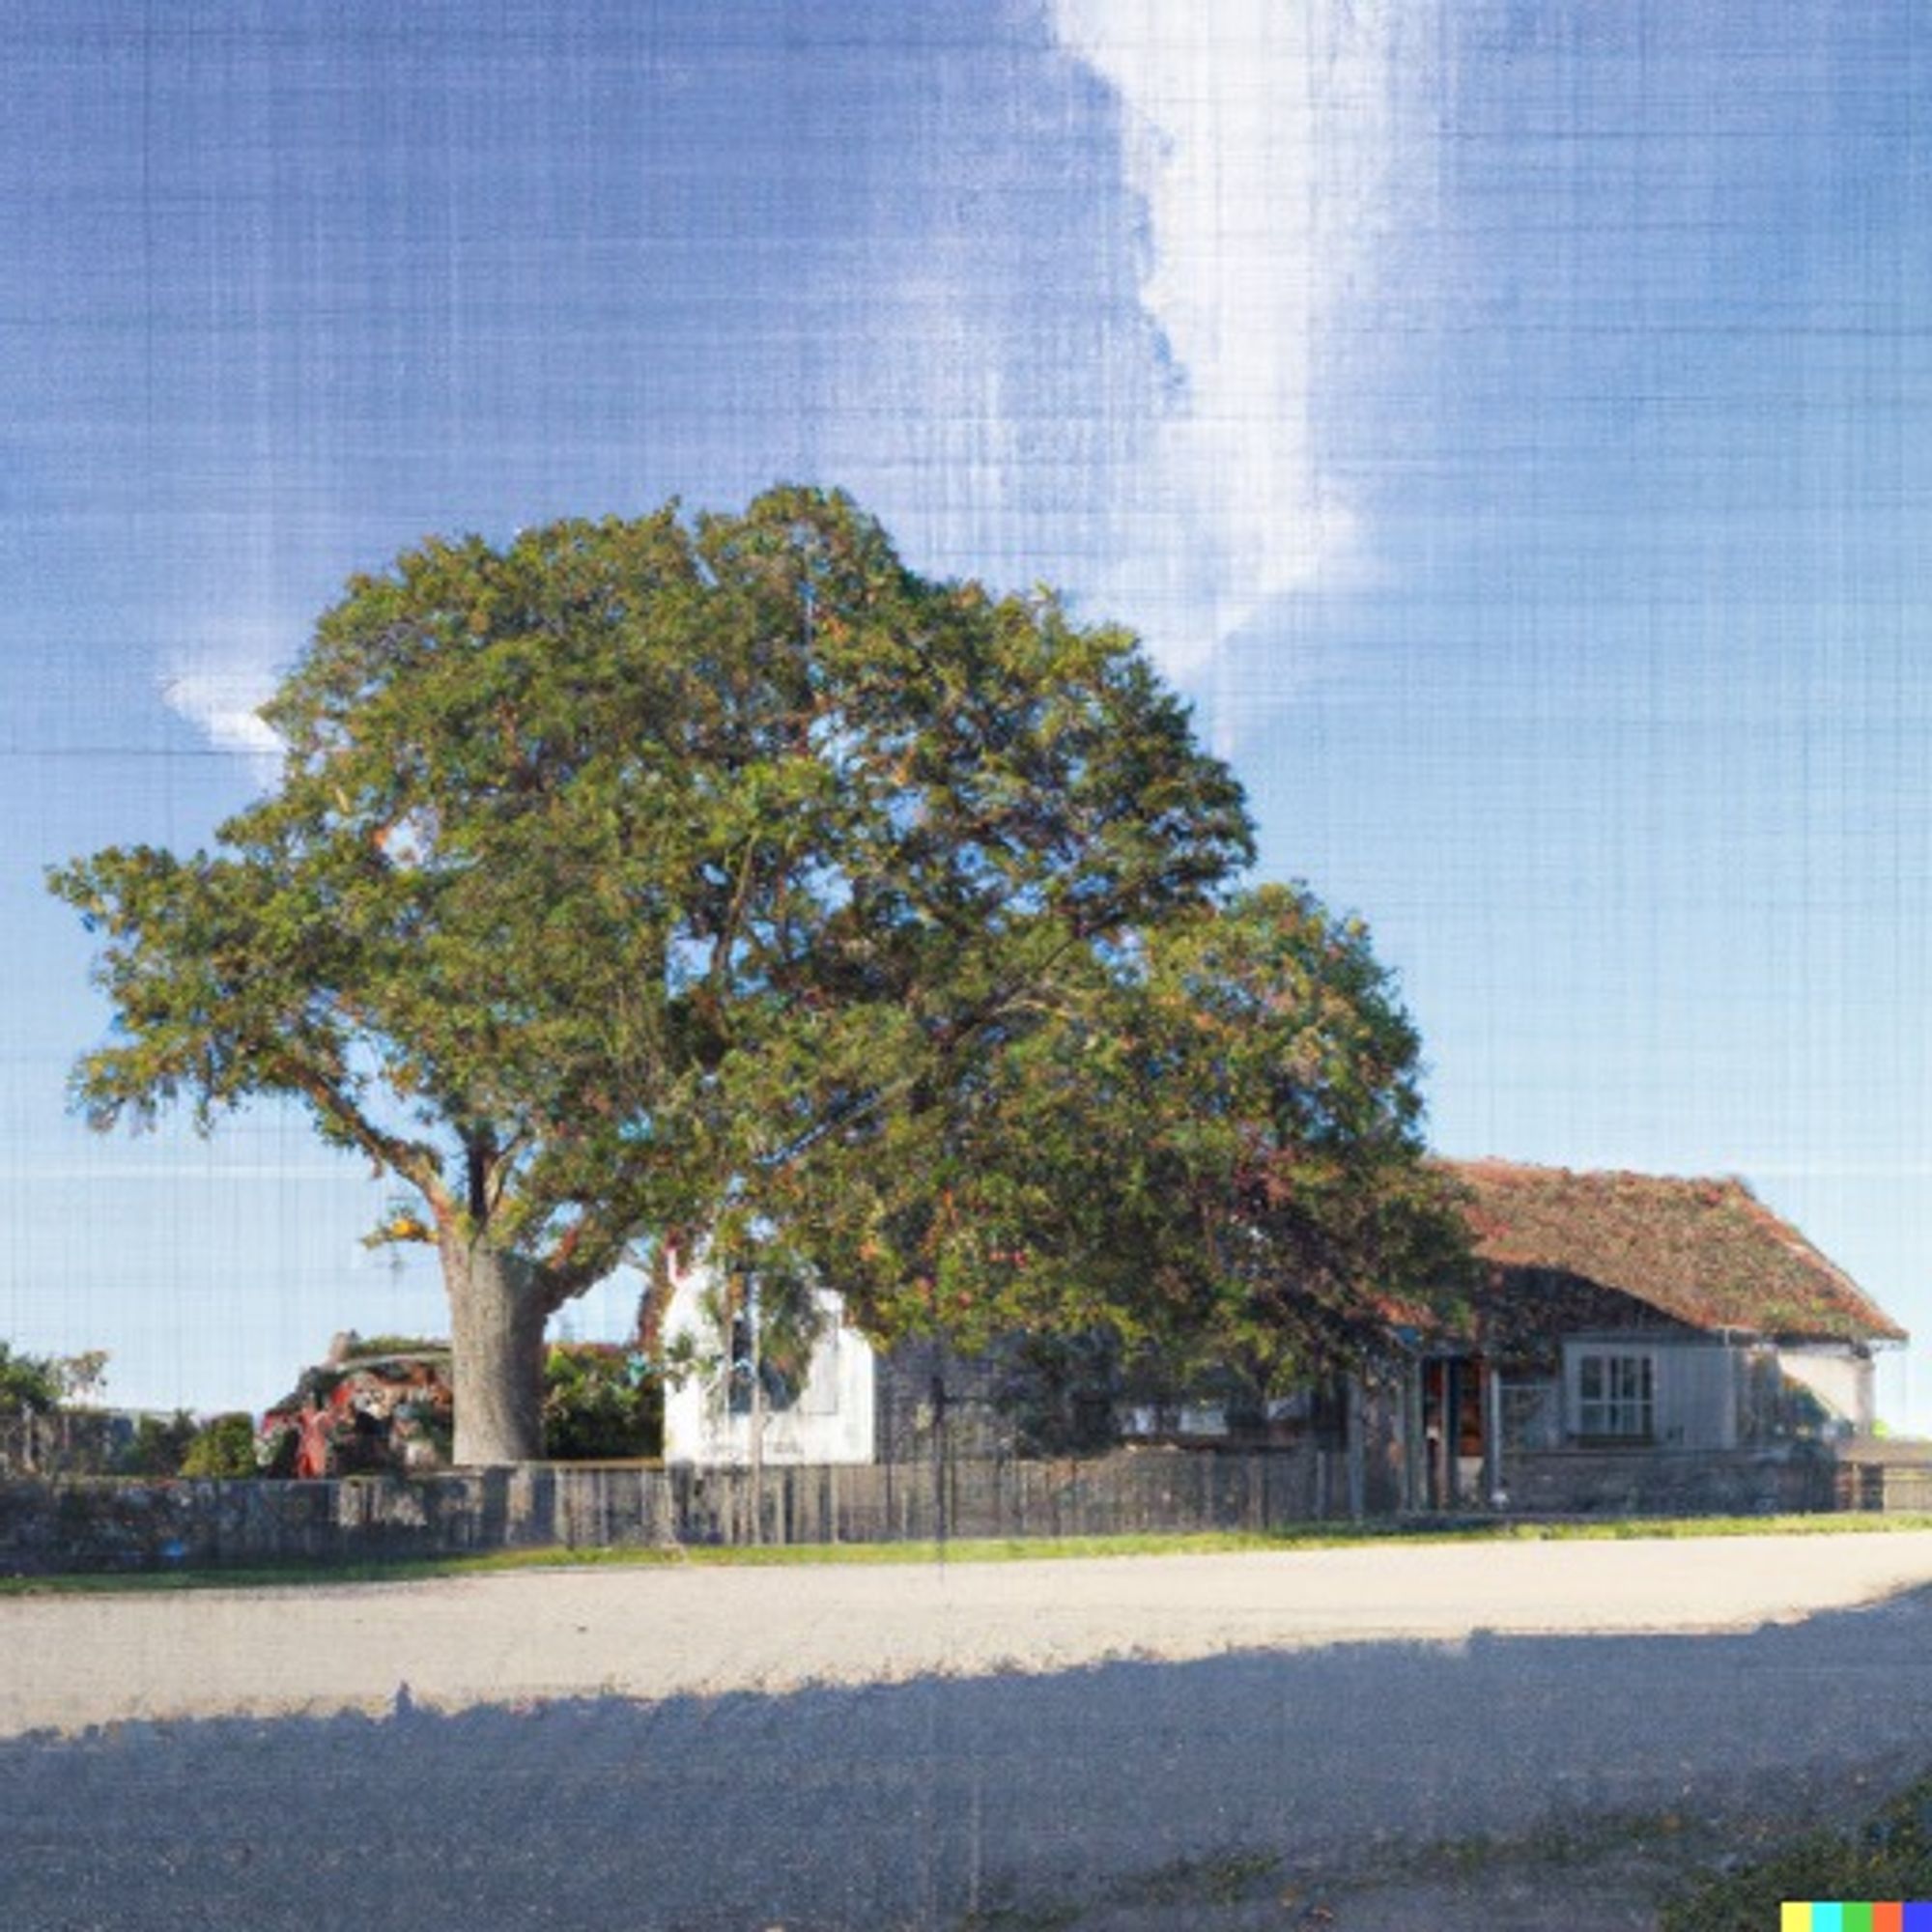 A computer-generated image of a tree in a backyard